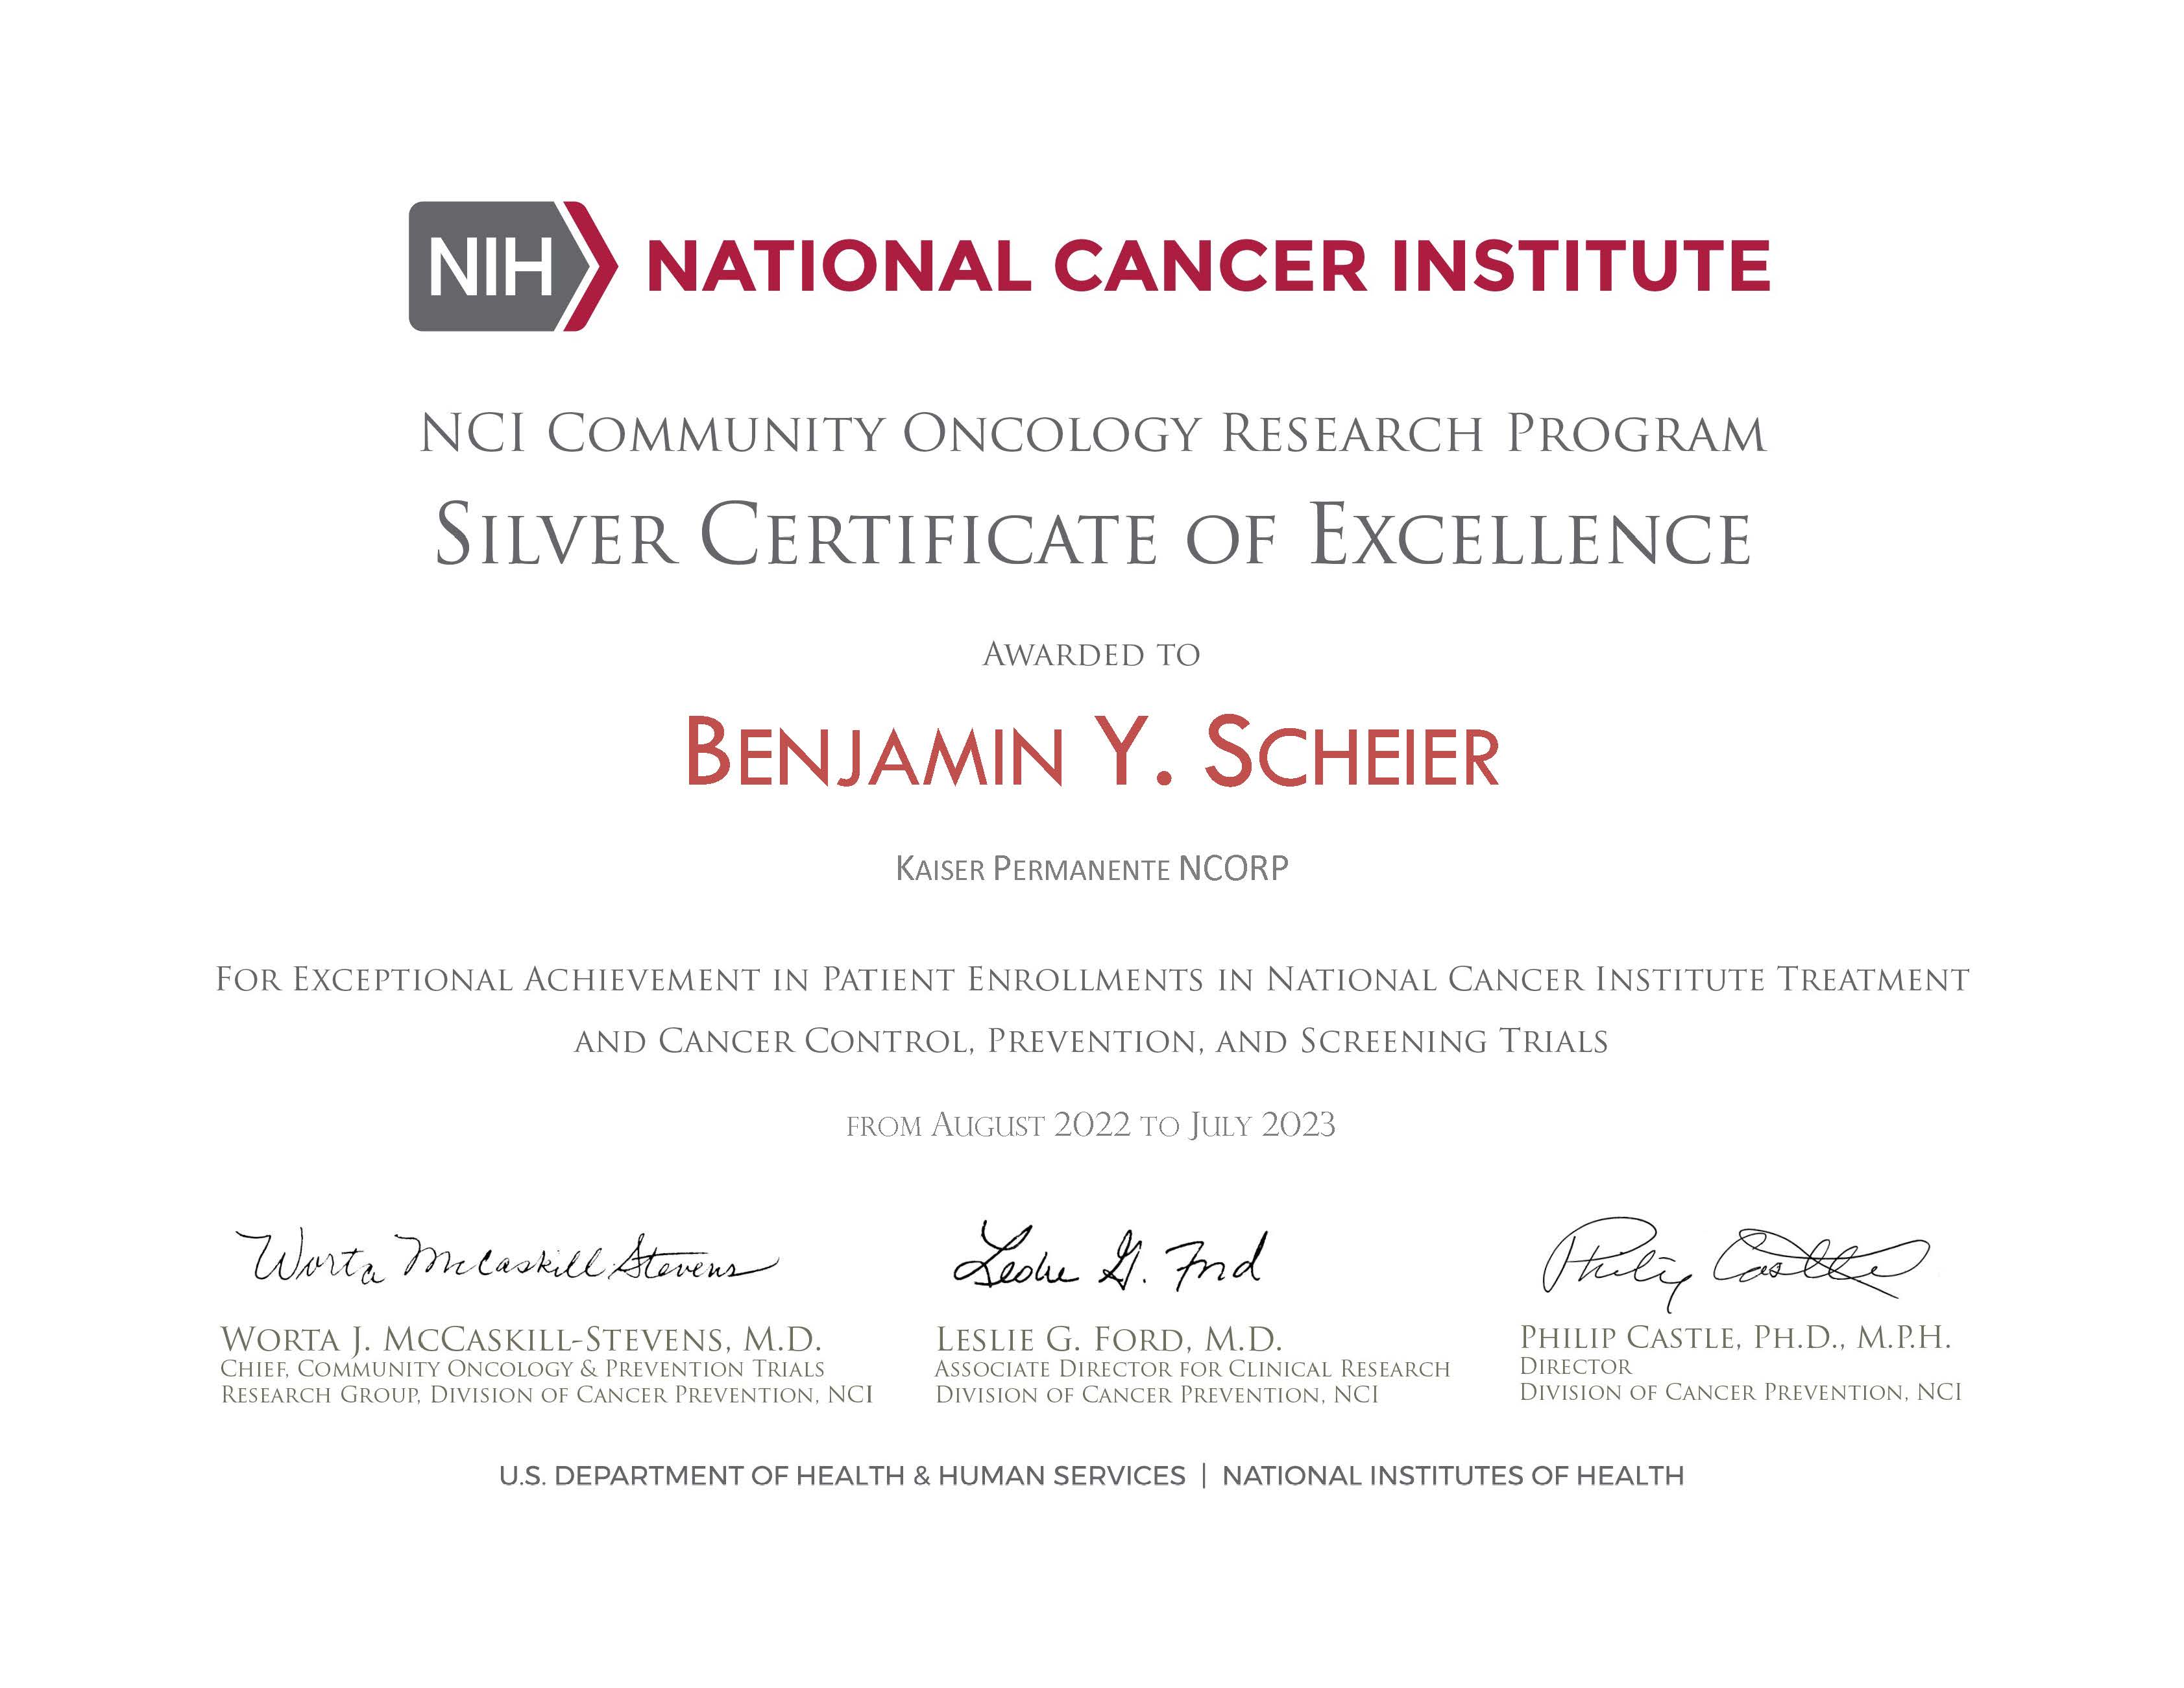 Image of Dr. Scheier's Silver Certificate of Excellence for their exceptional achievement in clinical trial participation.